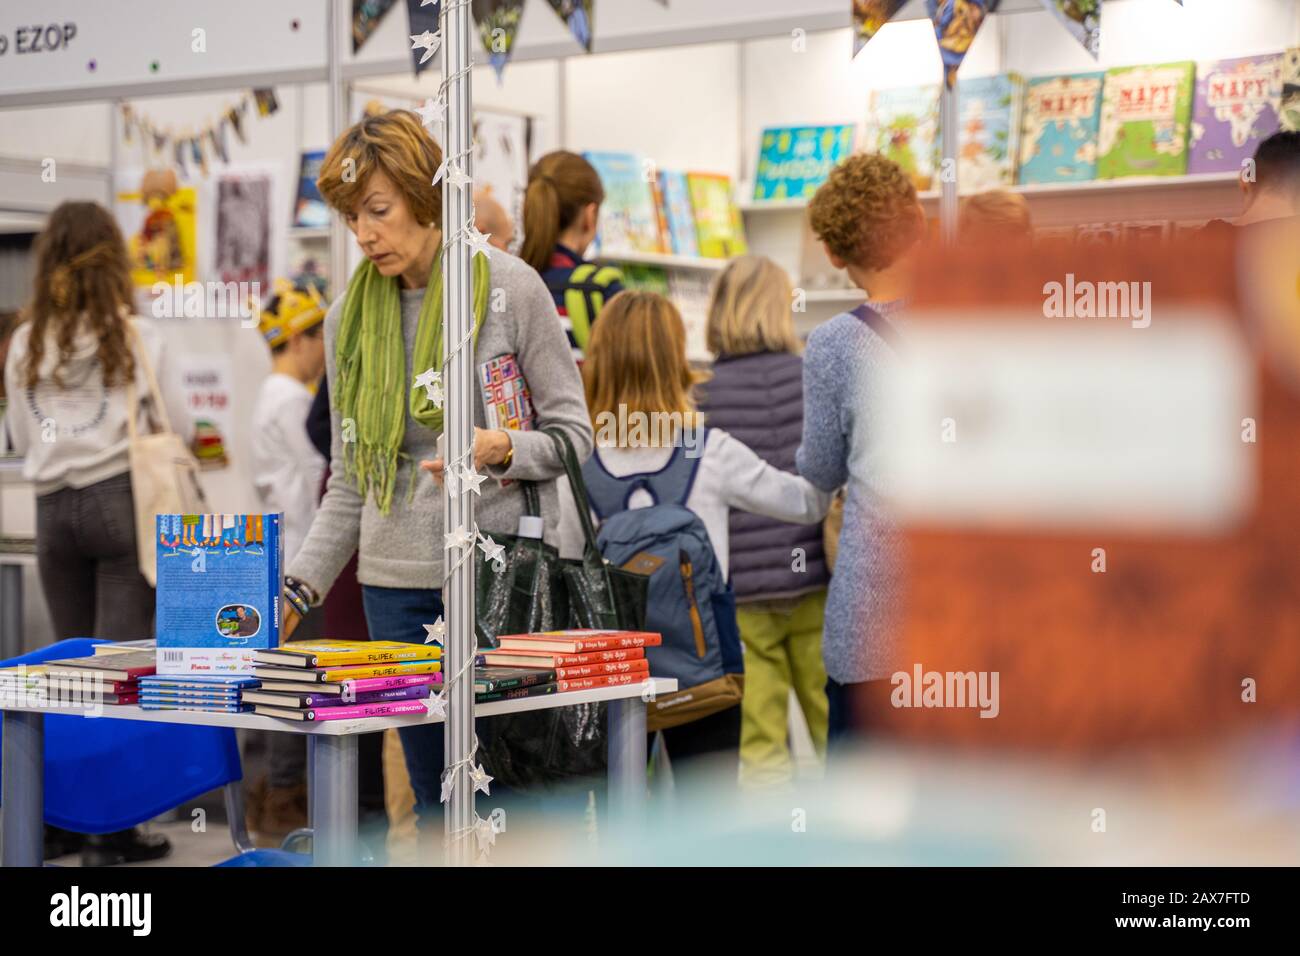 Katowice, Poland - December 6-8, 2019: woman looking for books during Silesian Book Fair in Katowice in 2019 at International Congress Centre. Stock Photo